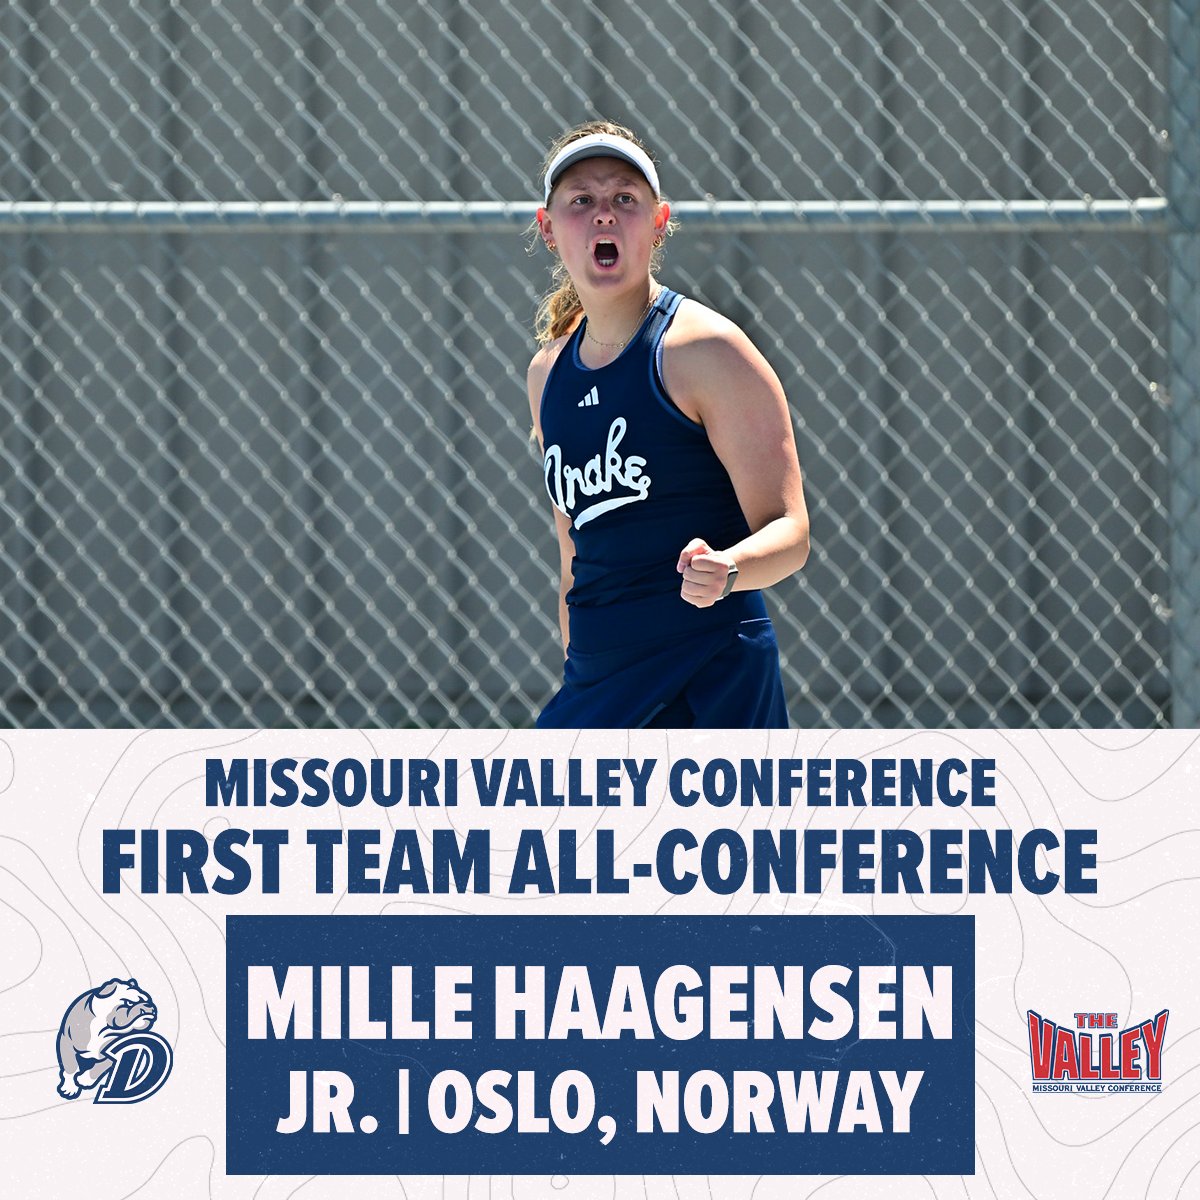 𝐅𝐢𝐫𝐬𝐭 𝐓𝐞𝐚𝐦 𝐀𝐥𝐥-𝐂𝐨𝐧𝐟𝐞𝐫𝐞𝐧𝐜𝐞 !!

Mille Haagensen was named to the MVC First Team All-Conference in the number two singles spot. Congrats Mille!

🎾📰➡️ shorturl.at/rEGR3

#DSMHometownTeam